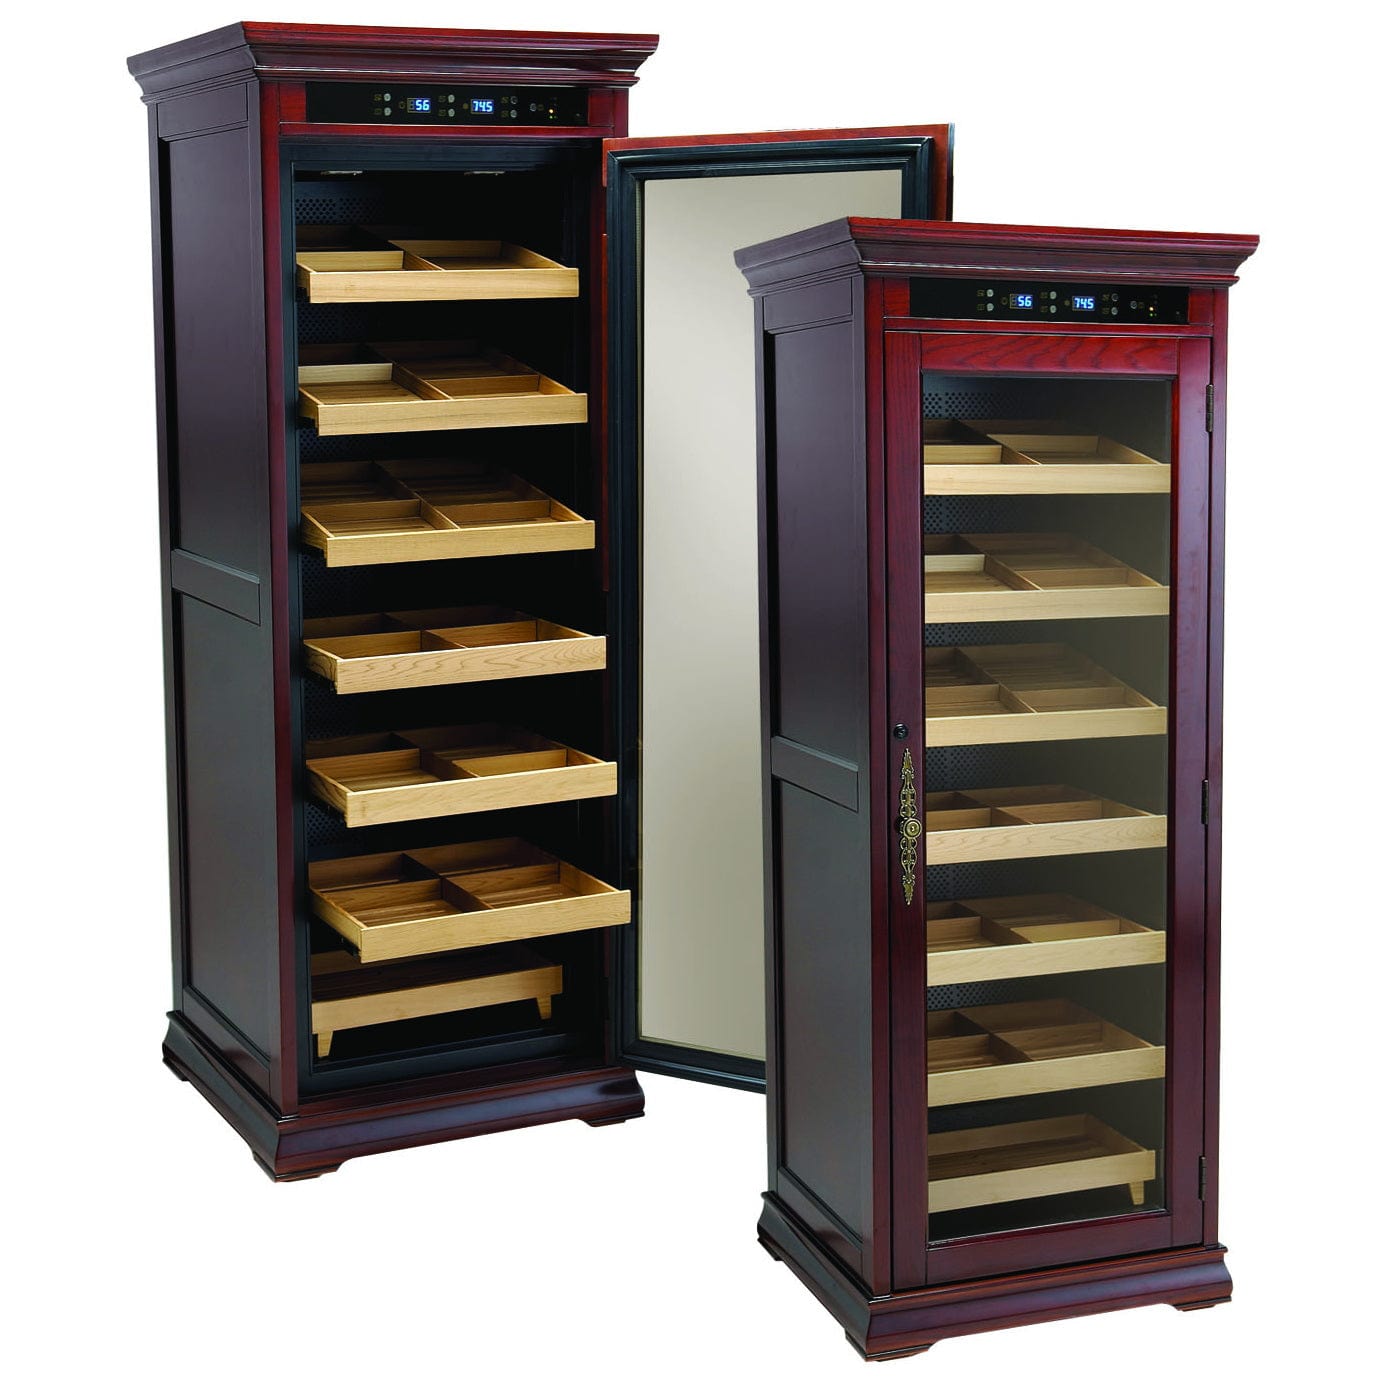 The Remington Electric Cabinet Cigar Humidor Cigar Humidors Luxury Appliances Direct